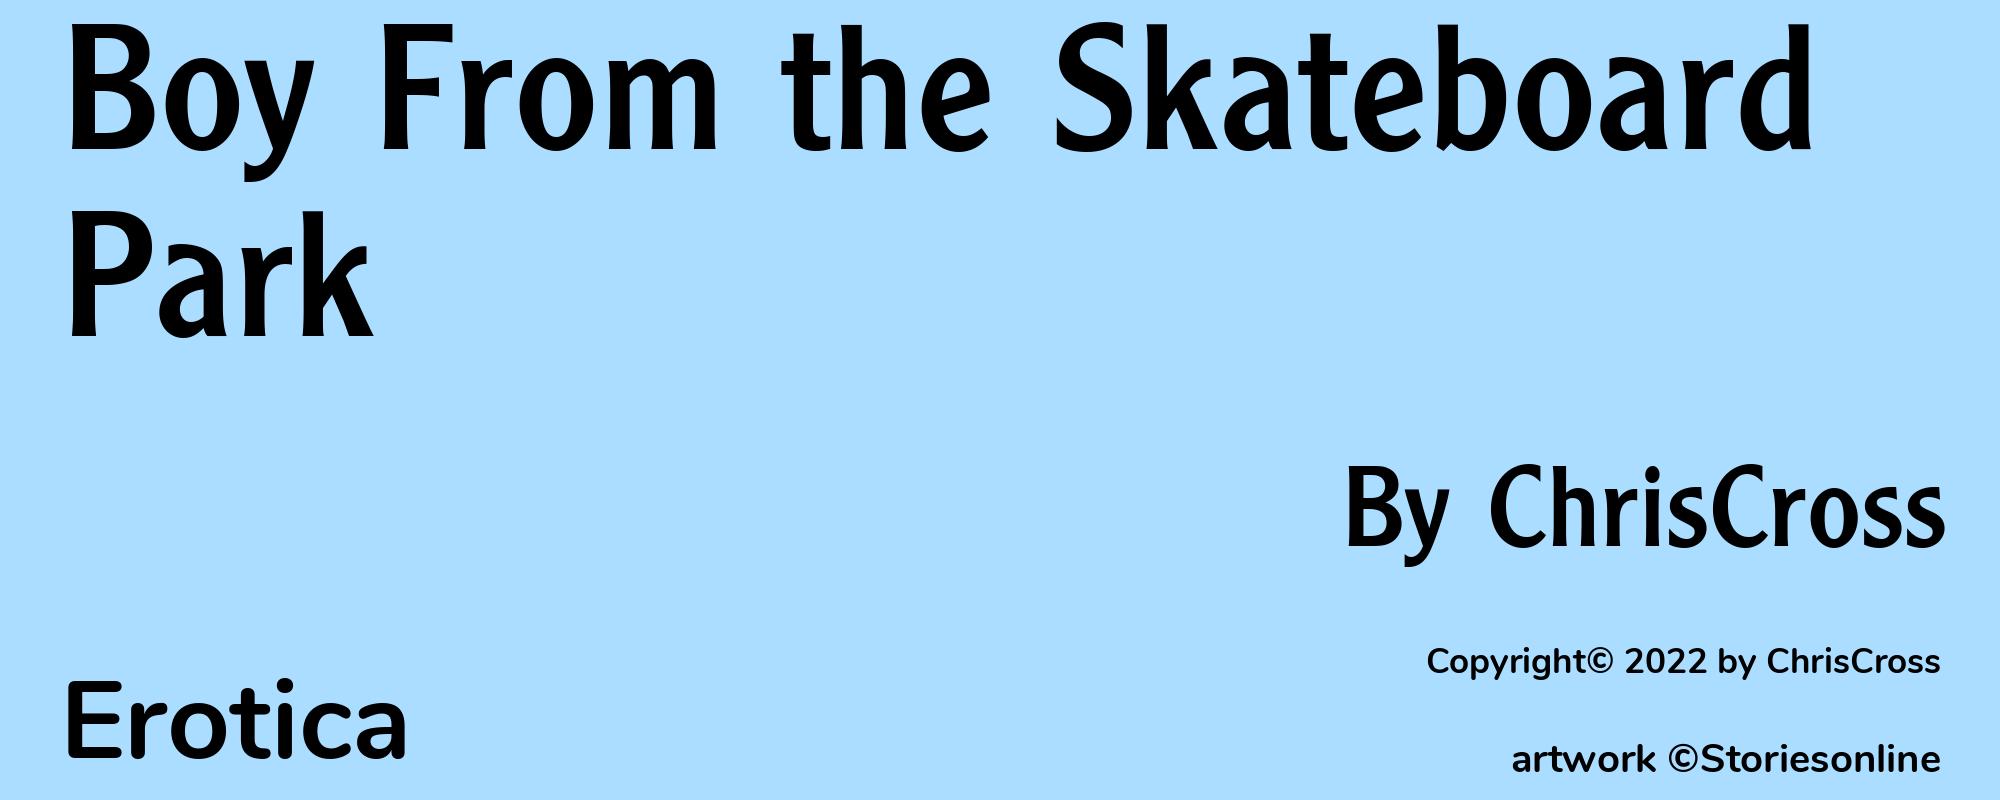 Boy From the Skateboard Park - Cover